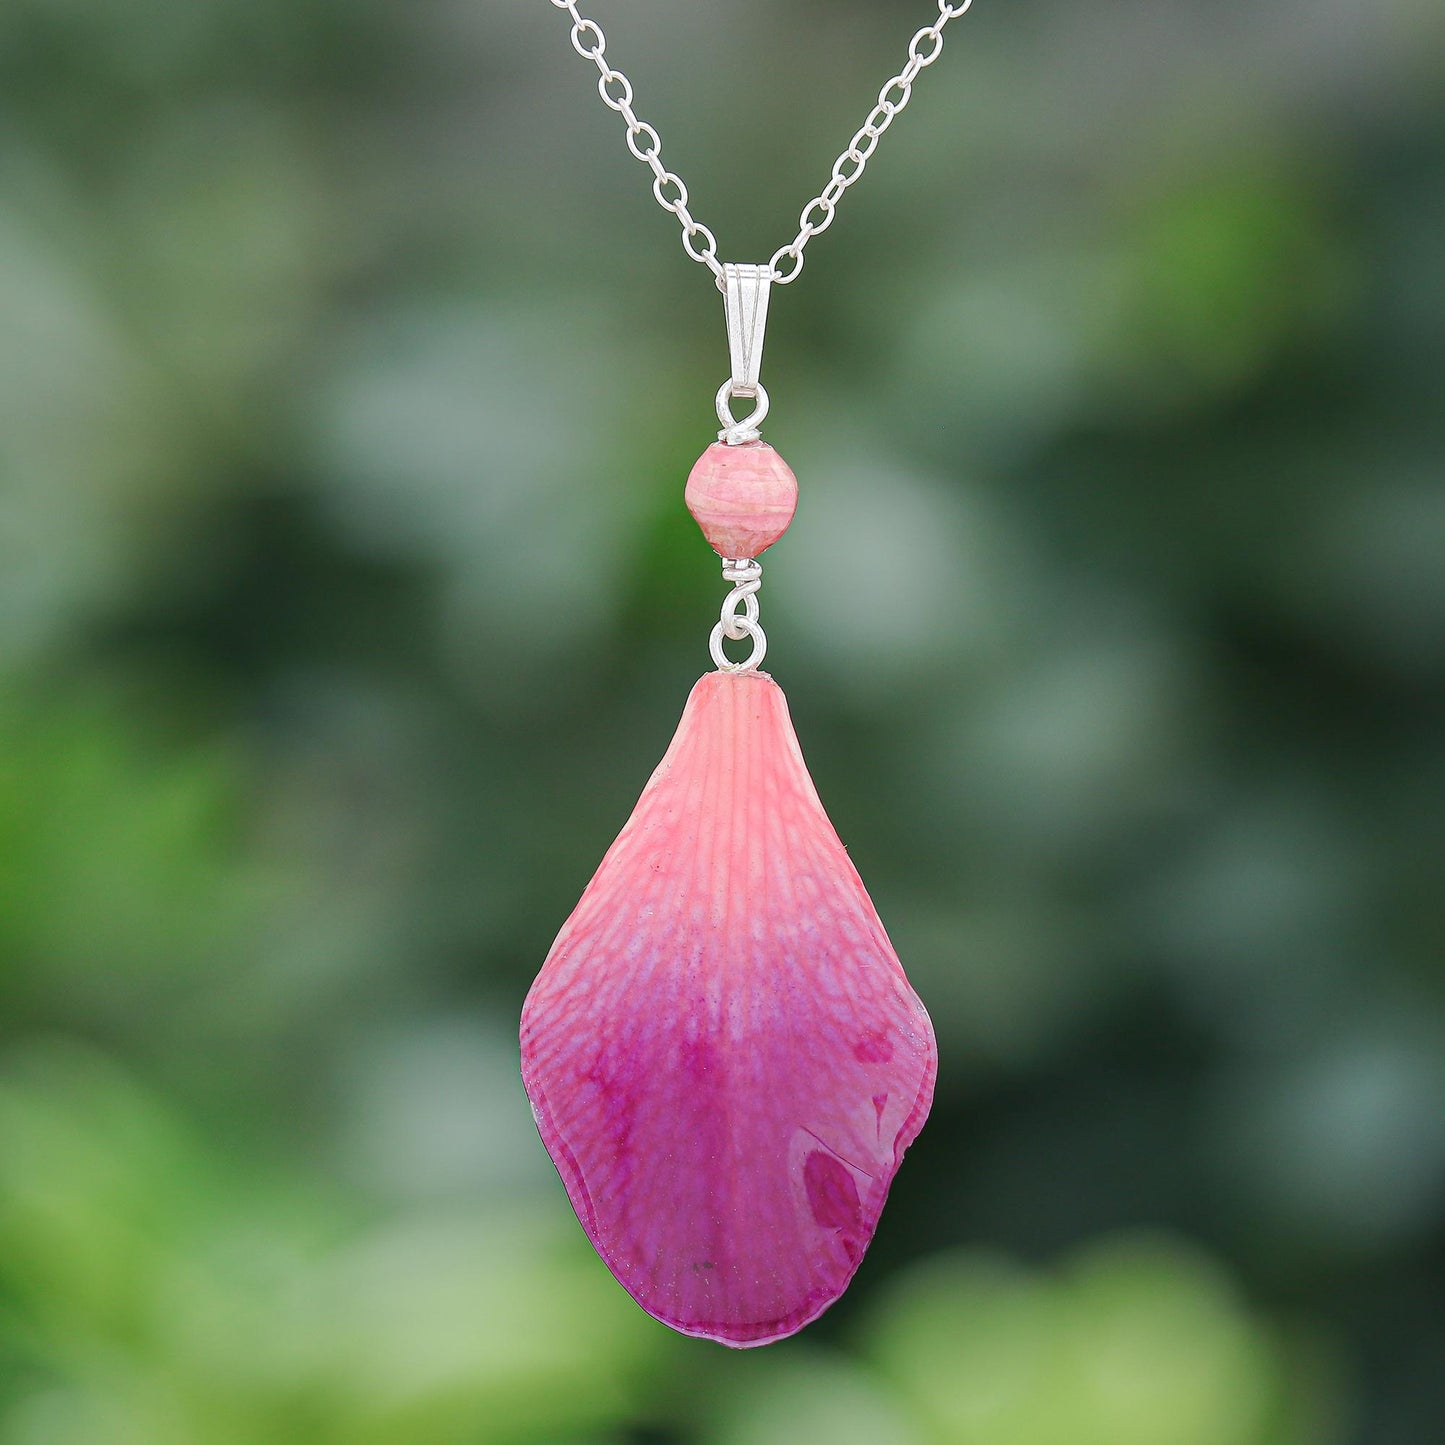 Bloom Basket in Fuchsia Resin-Coated Orchid Petal Pendant Necklace